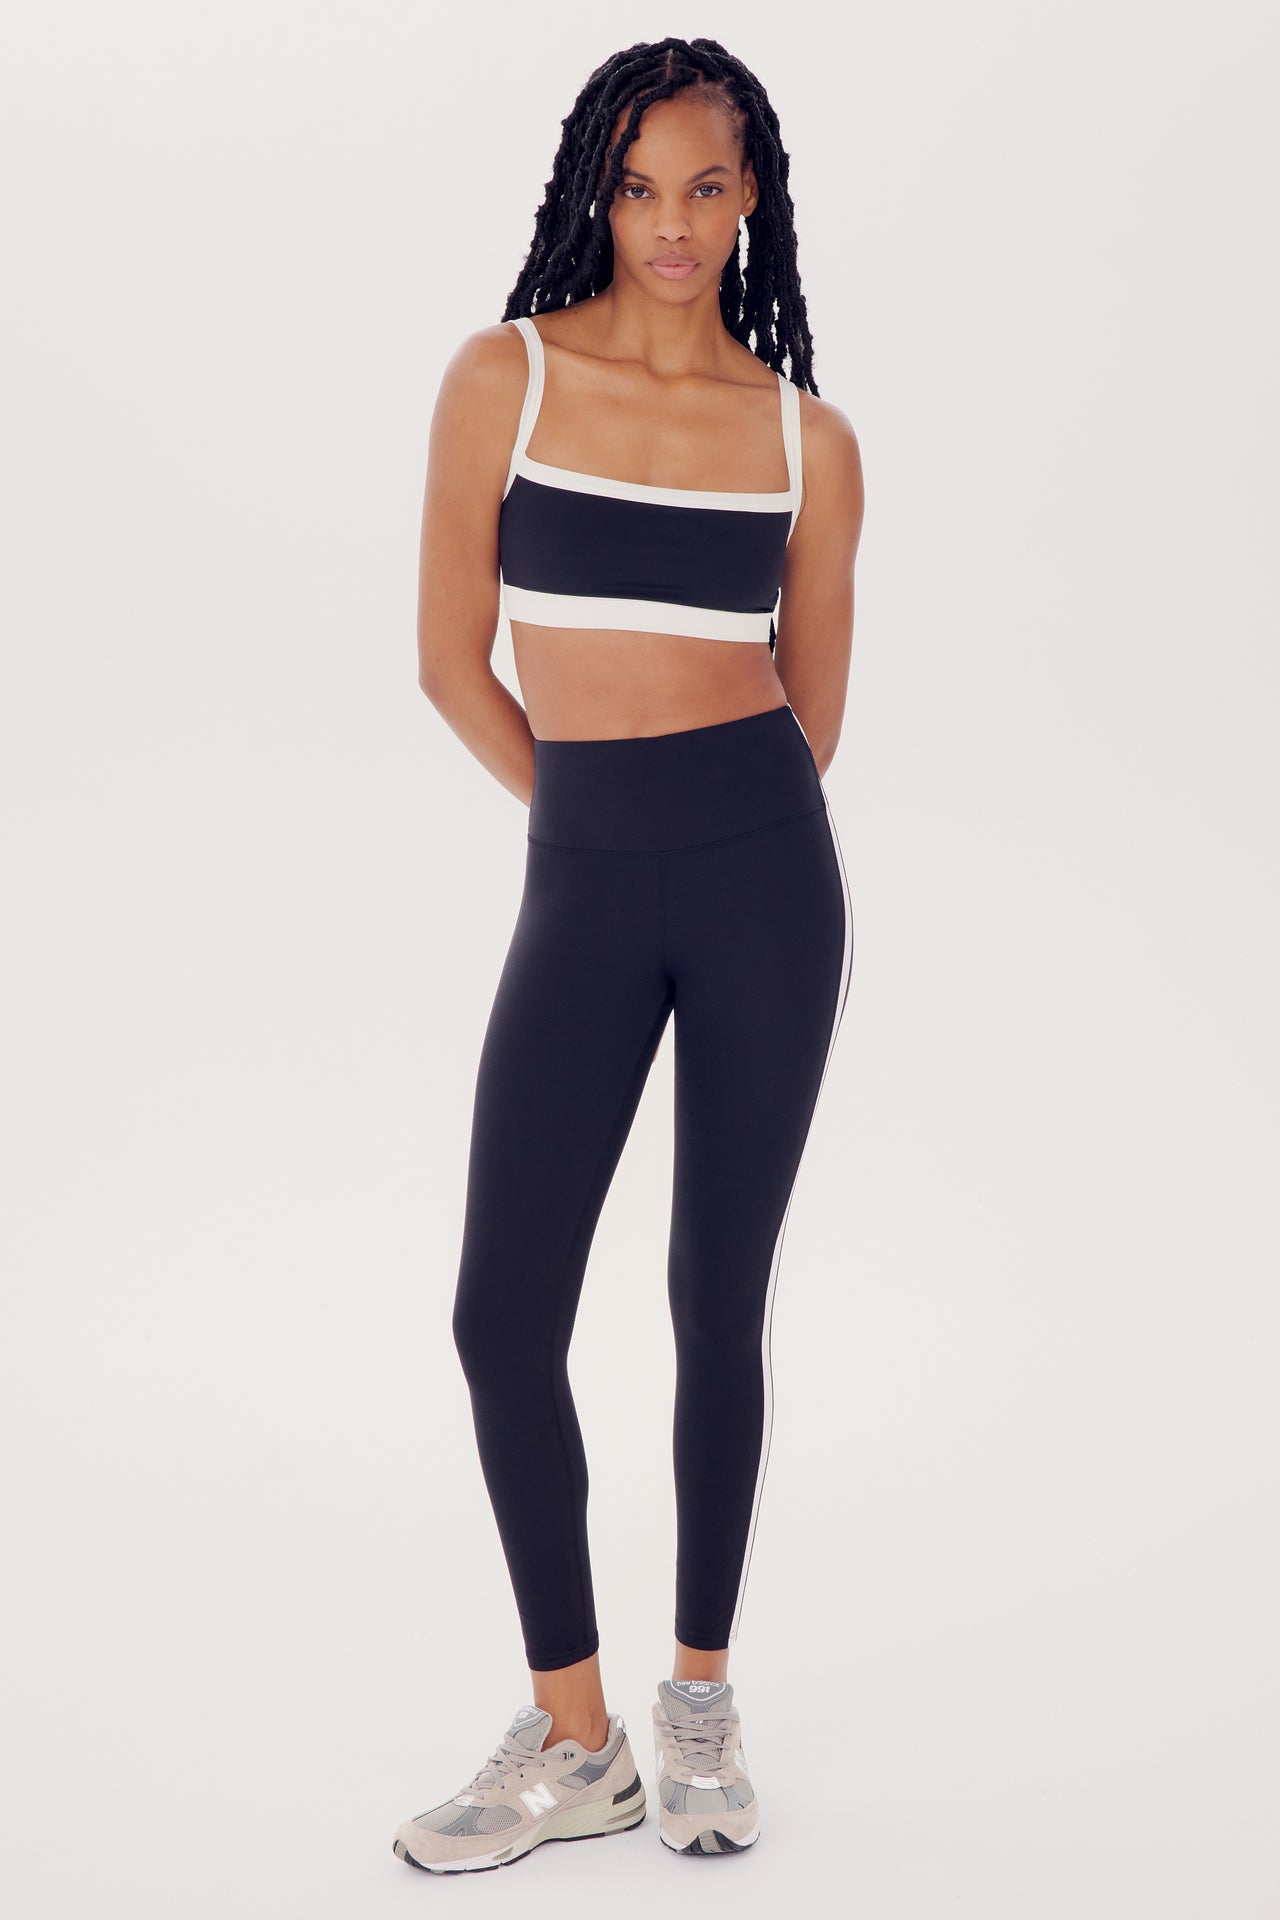 A woman in athletic wear, consisting of a black and white Monah Rigor Bra and leggings from SPLITS59, stands facing the camera with her hands by her sides.